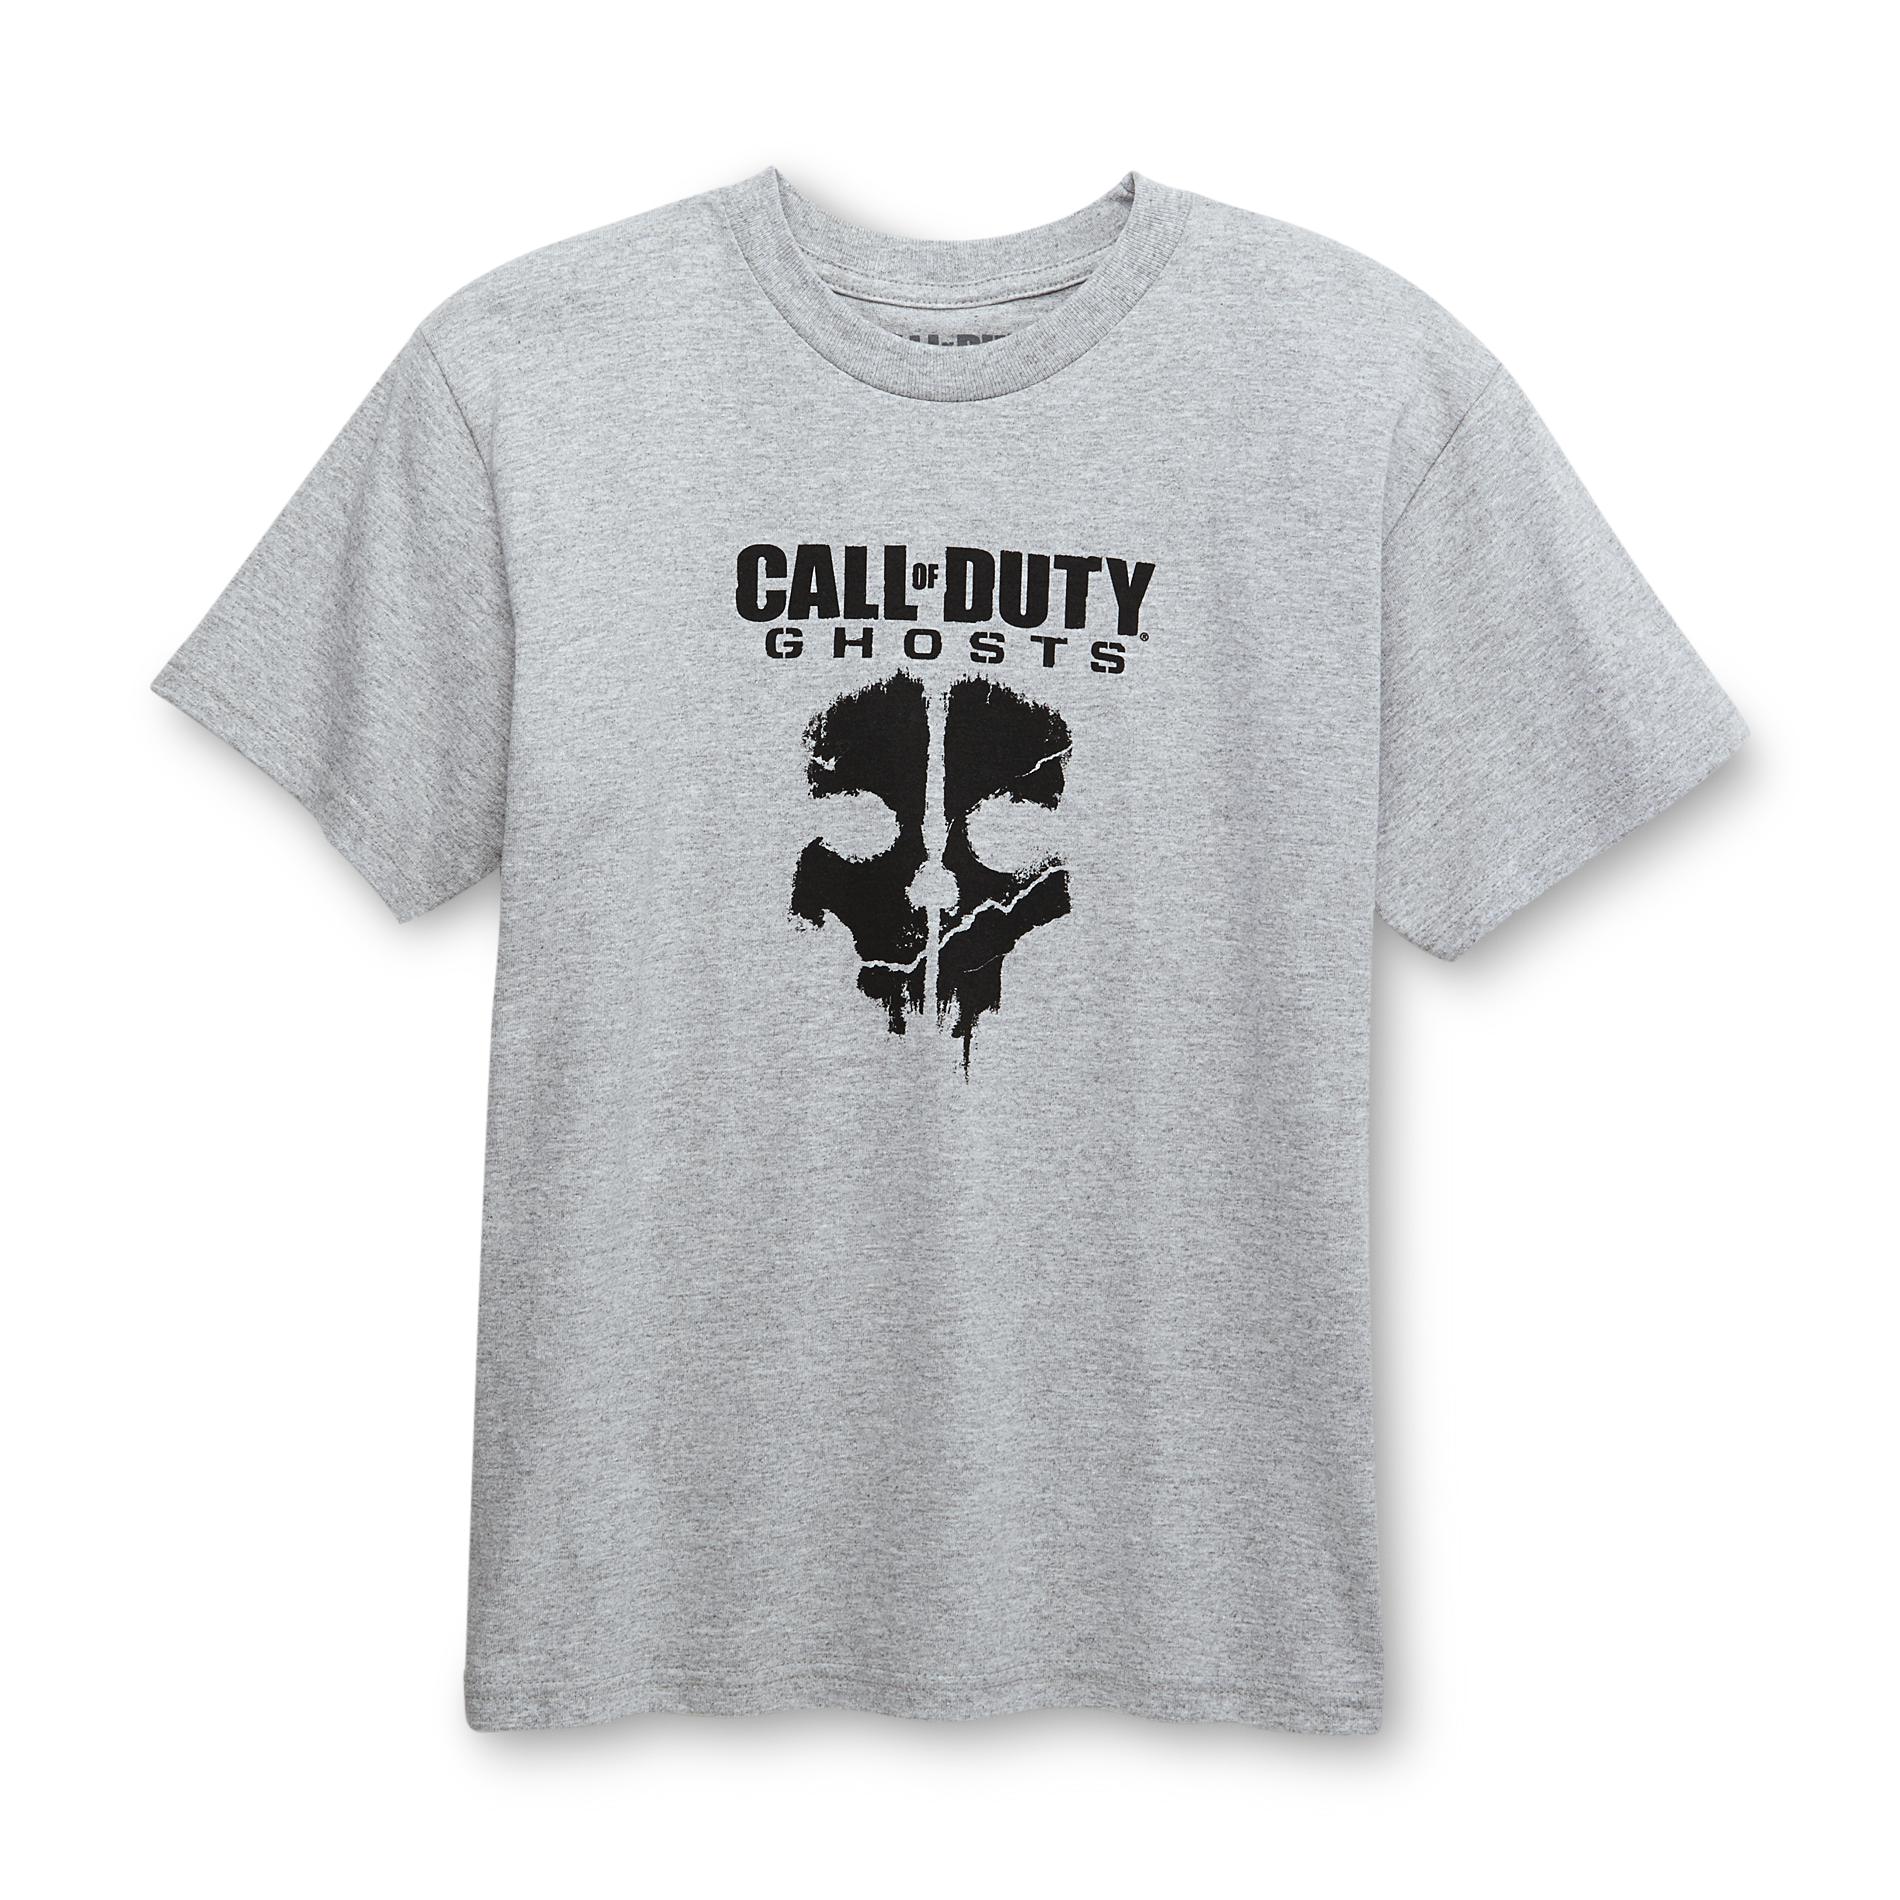 Call of Duty Ghosts Boy's Graphic T-Shirt - Skull